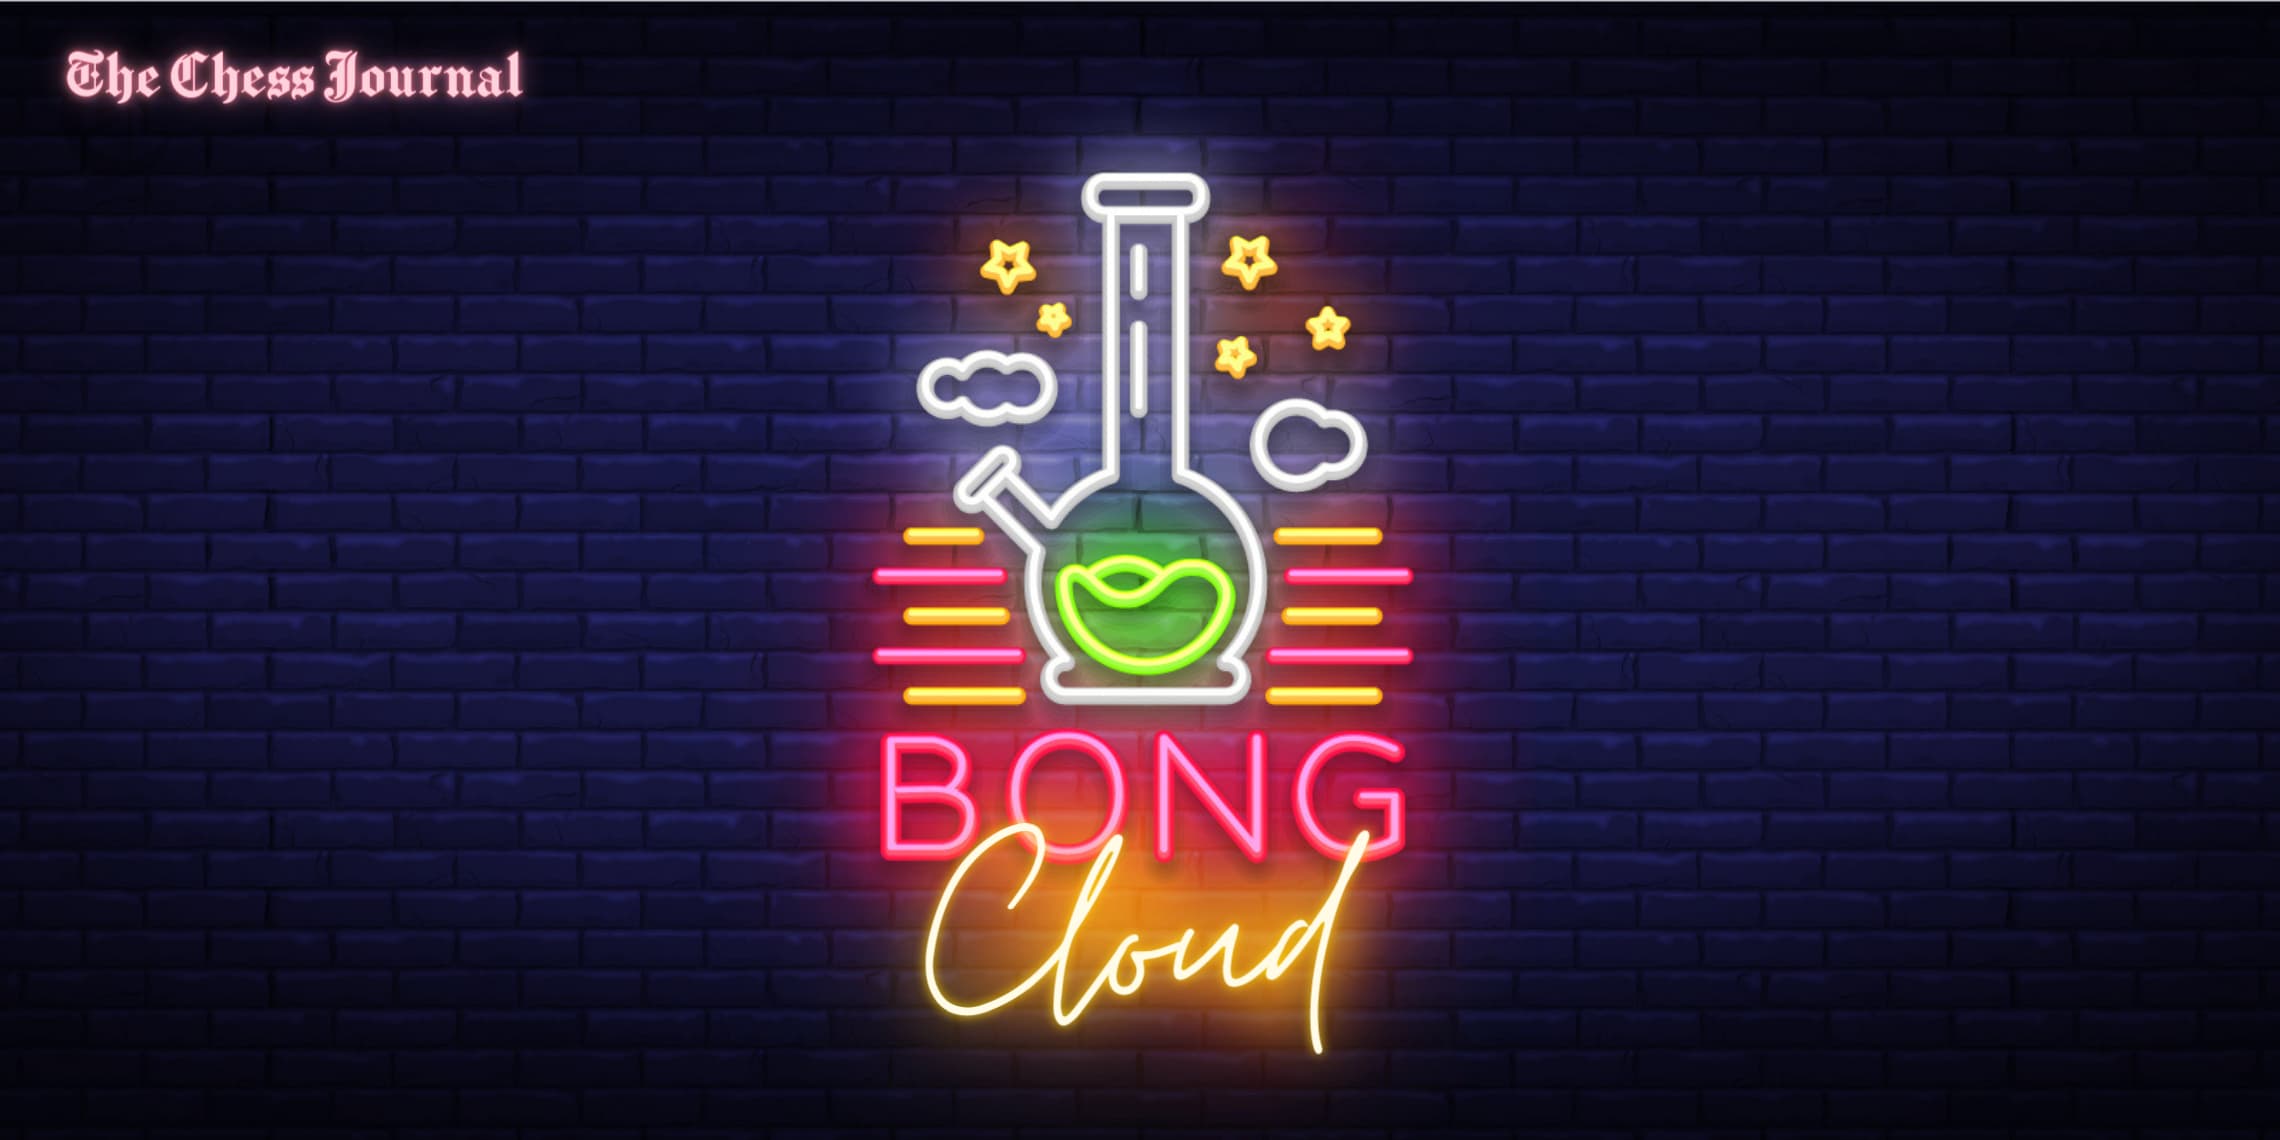 Elpedes CHESS - THE LATEST BONGCLOUD ATTACK ⛈️ by Hikaru Nakamura Ctto  Wikipedia & Chessbomb As a joke opening, the Bongcloud enjoys a cult  following within the online chess community. The opening